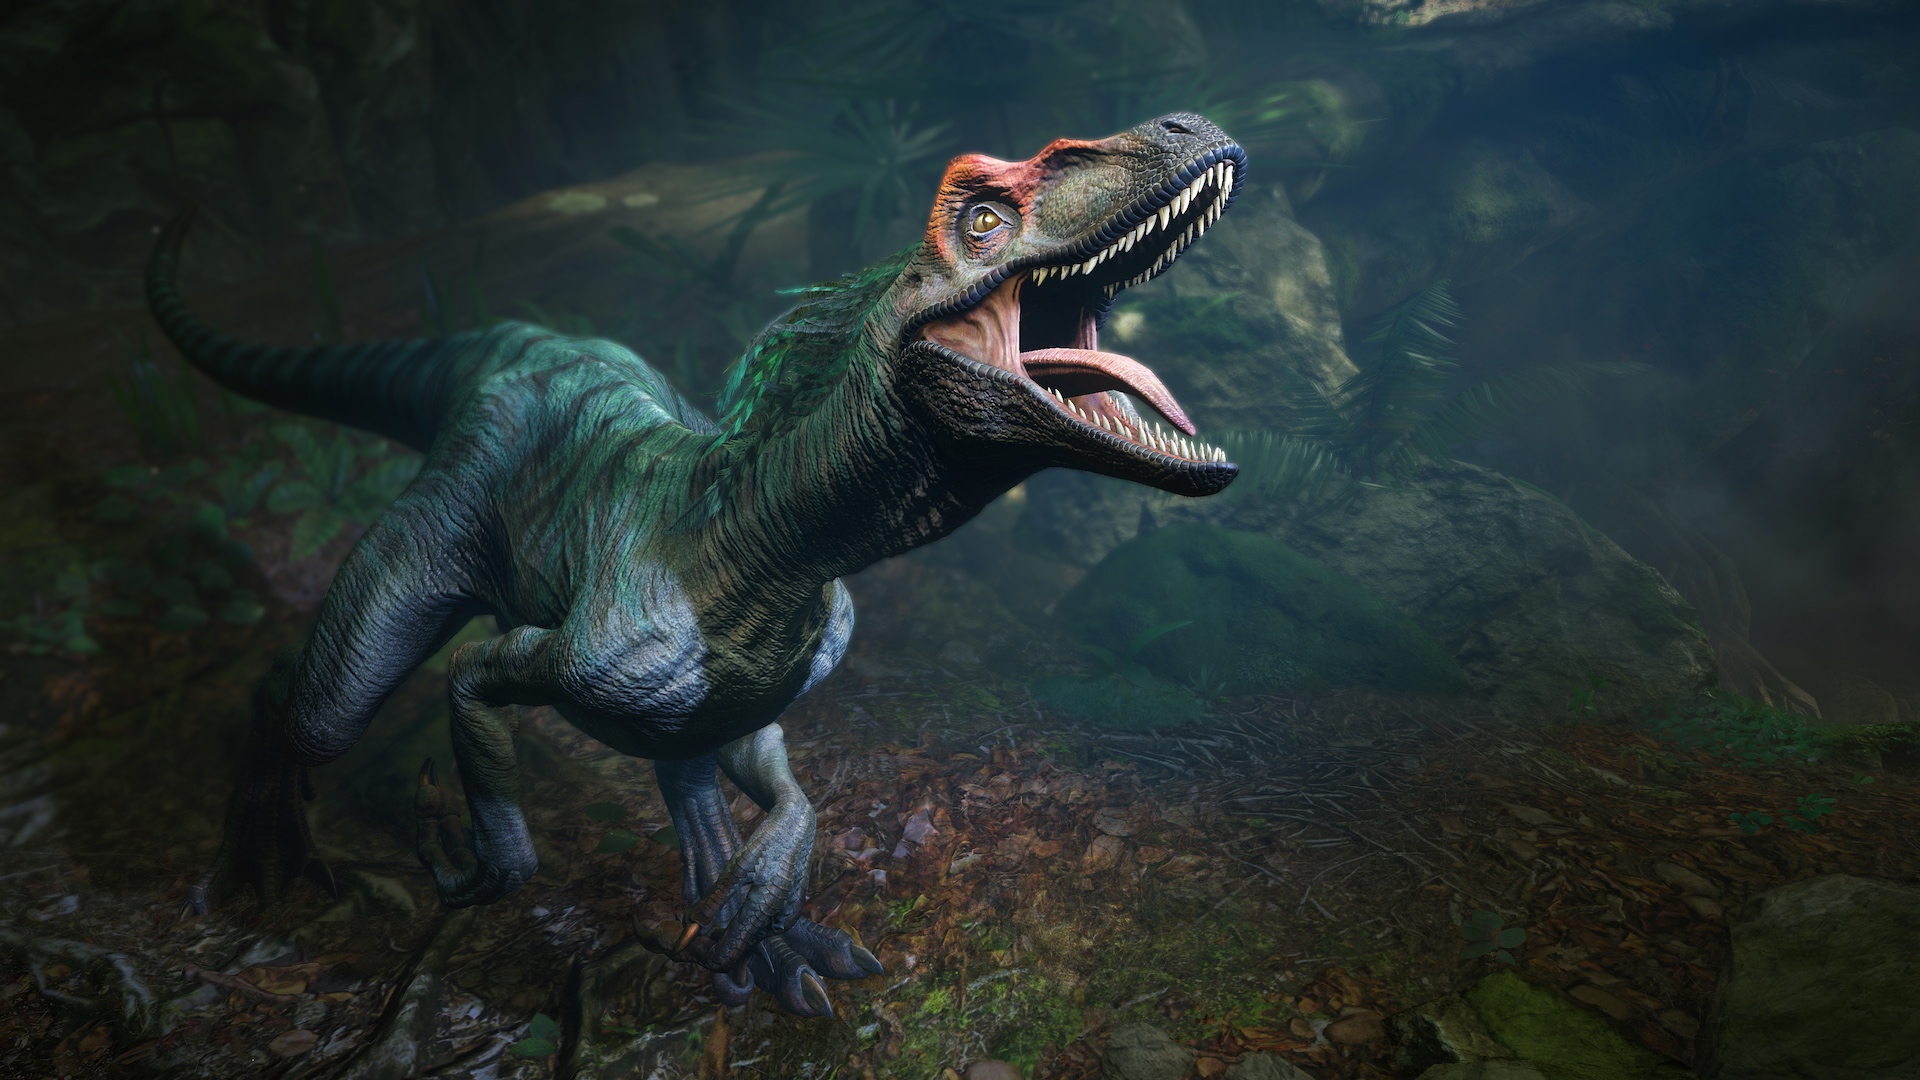 Why dinosaurs in | Engadget